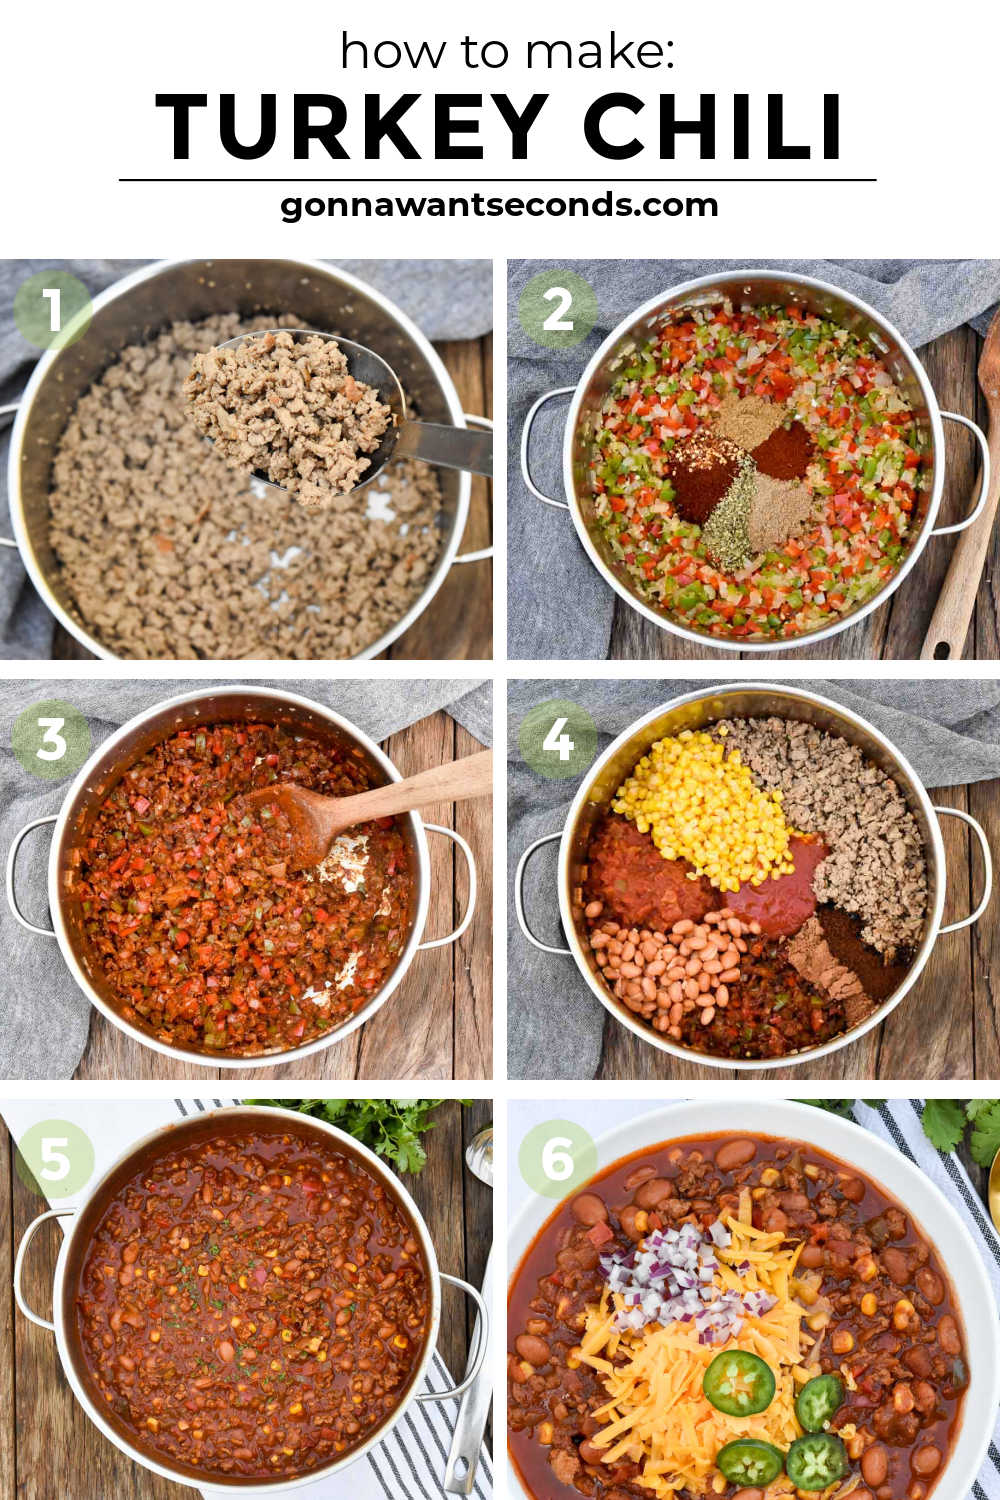 Step by step How to make Turkey Chili